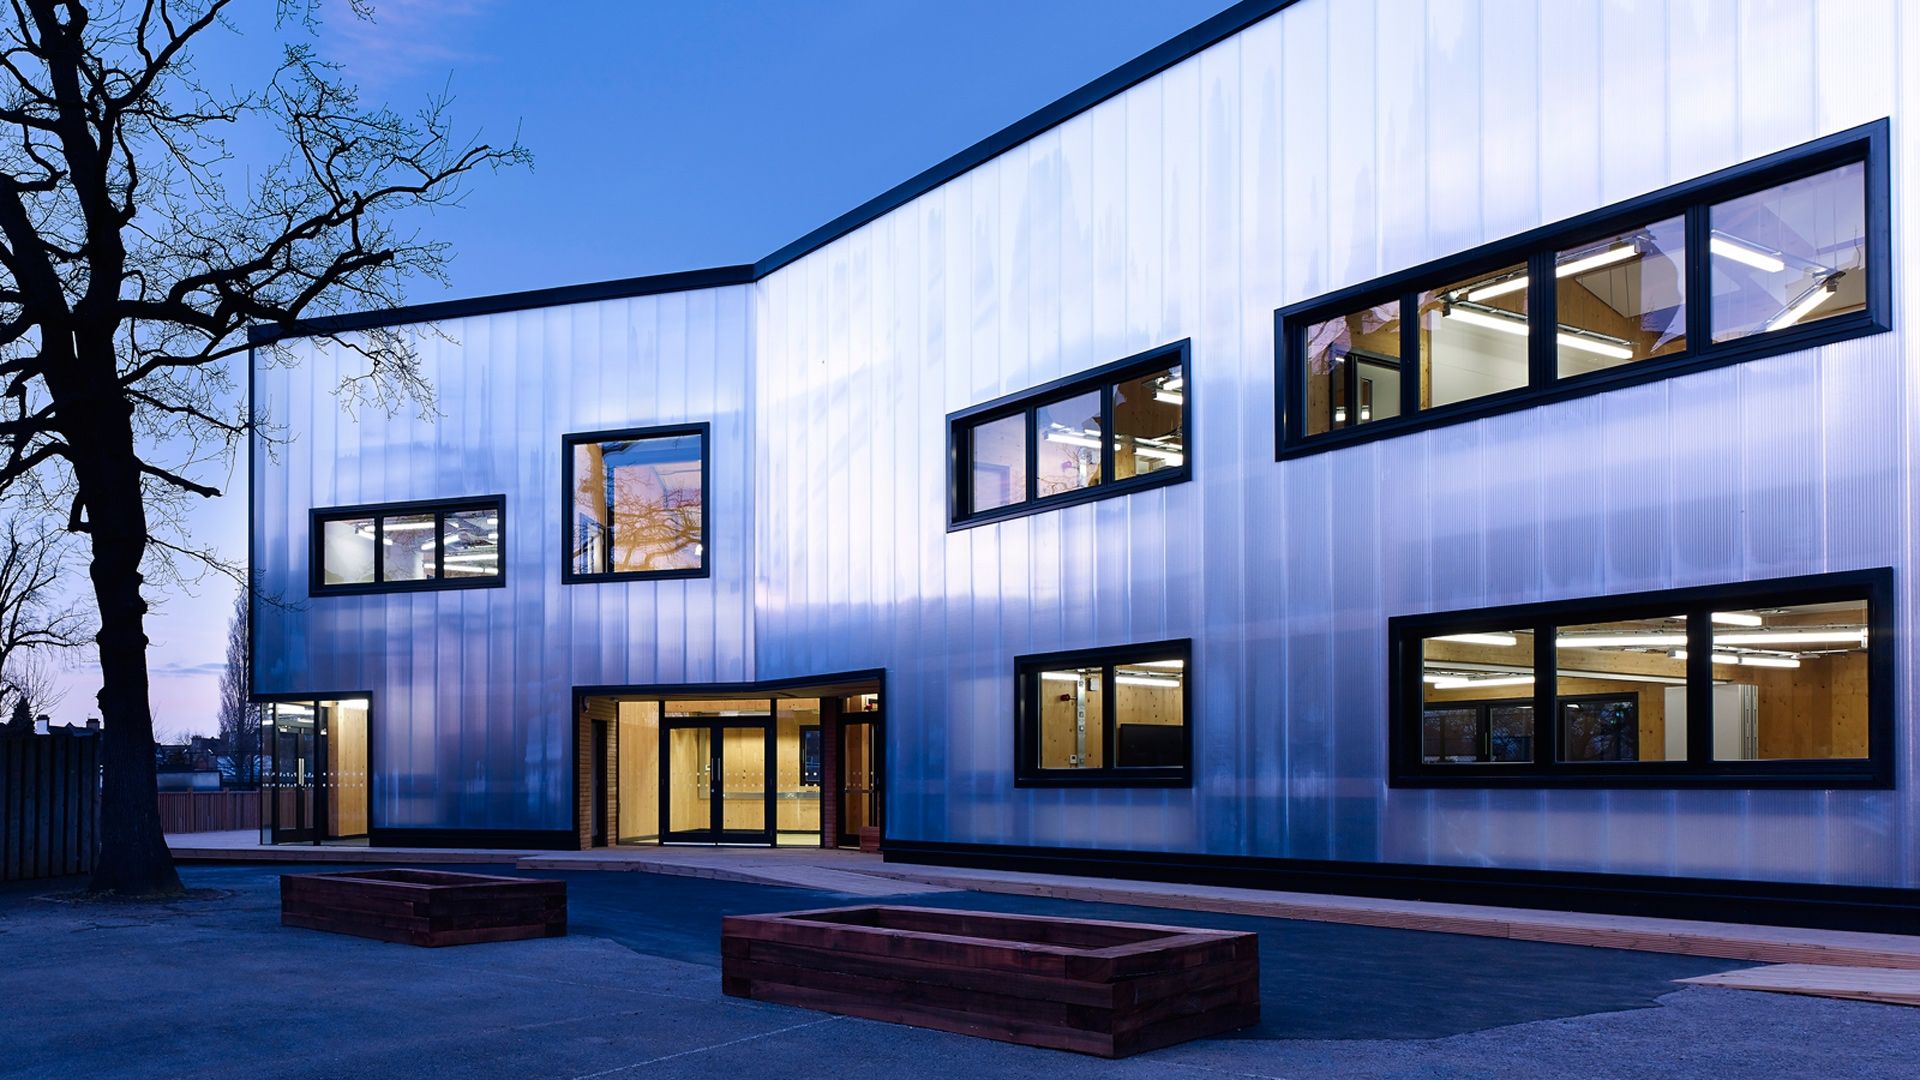 Urban Projects Bureau's school building uses creative solutions inspired